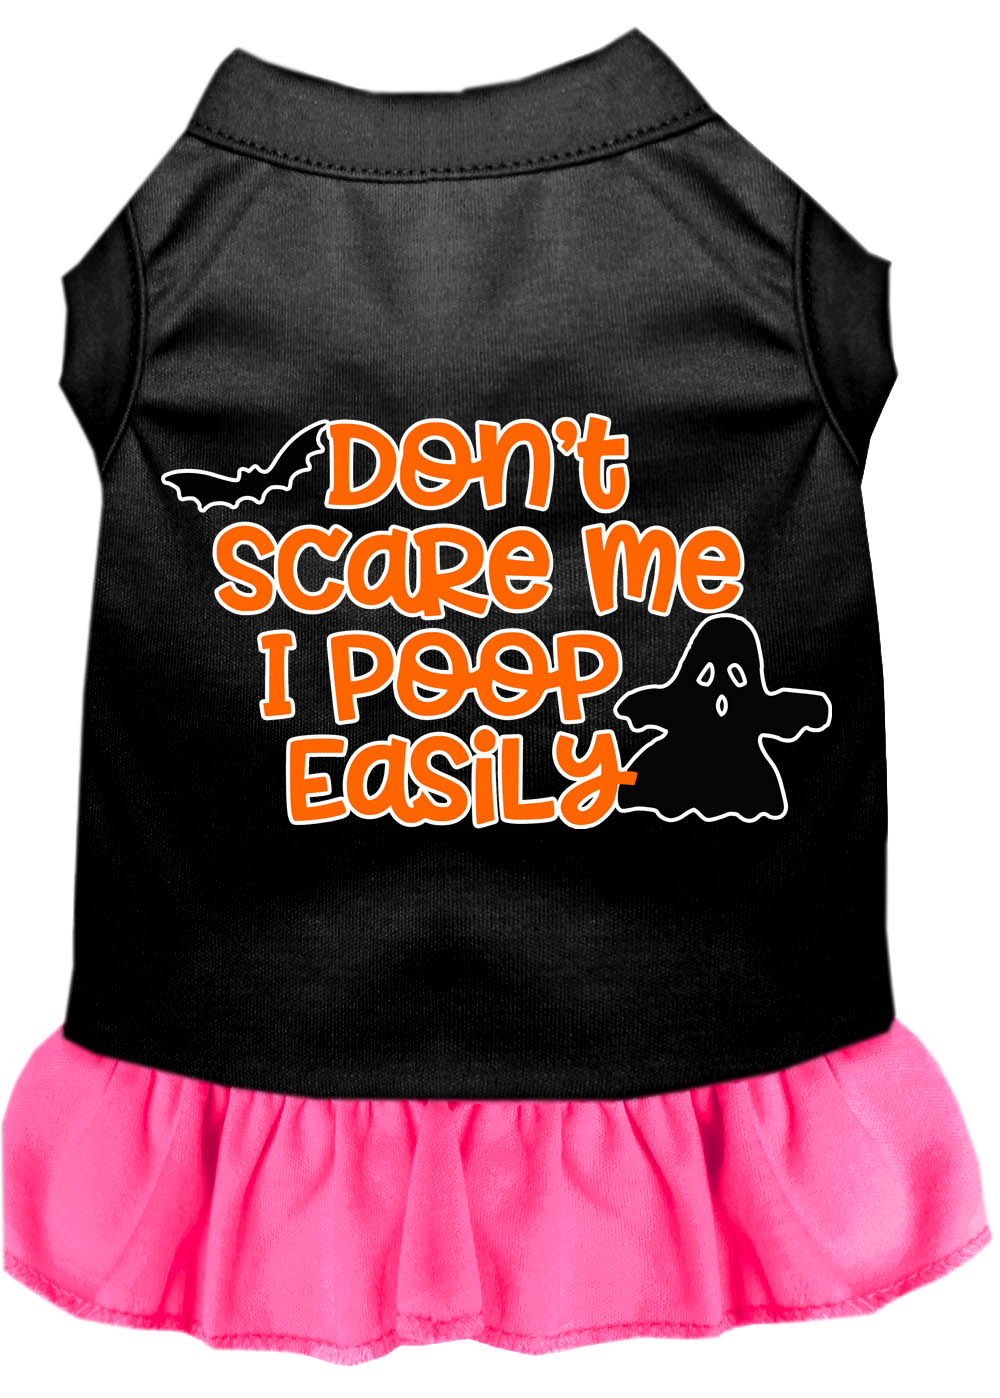 Don't Scare Me, Poops Easily Screen Print Dog Dress Black with Bright Pink Sm